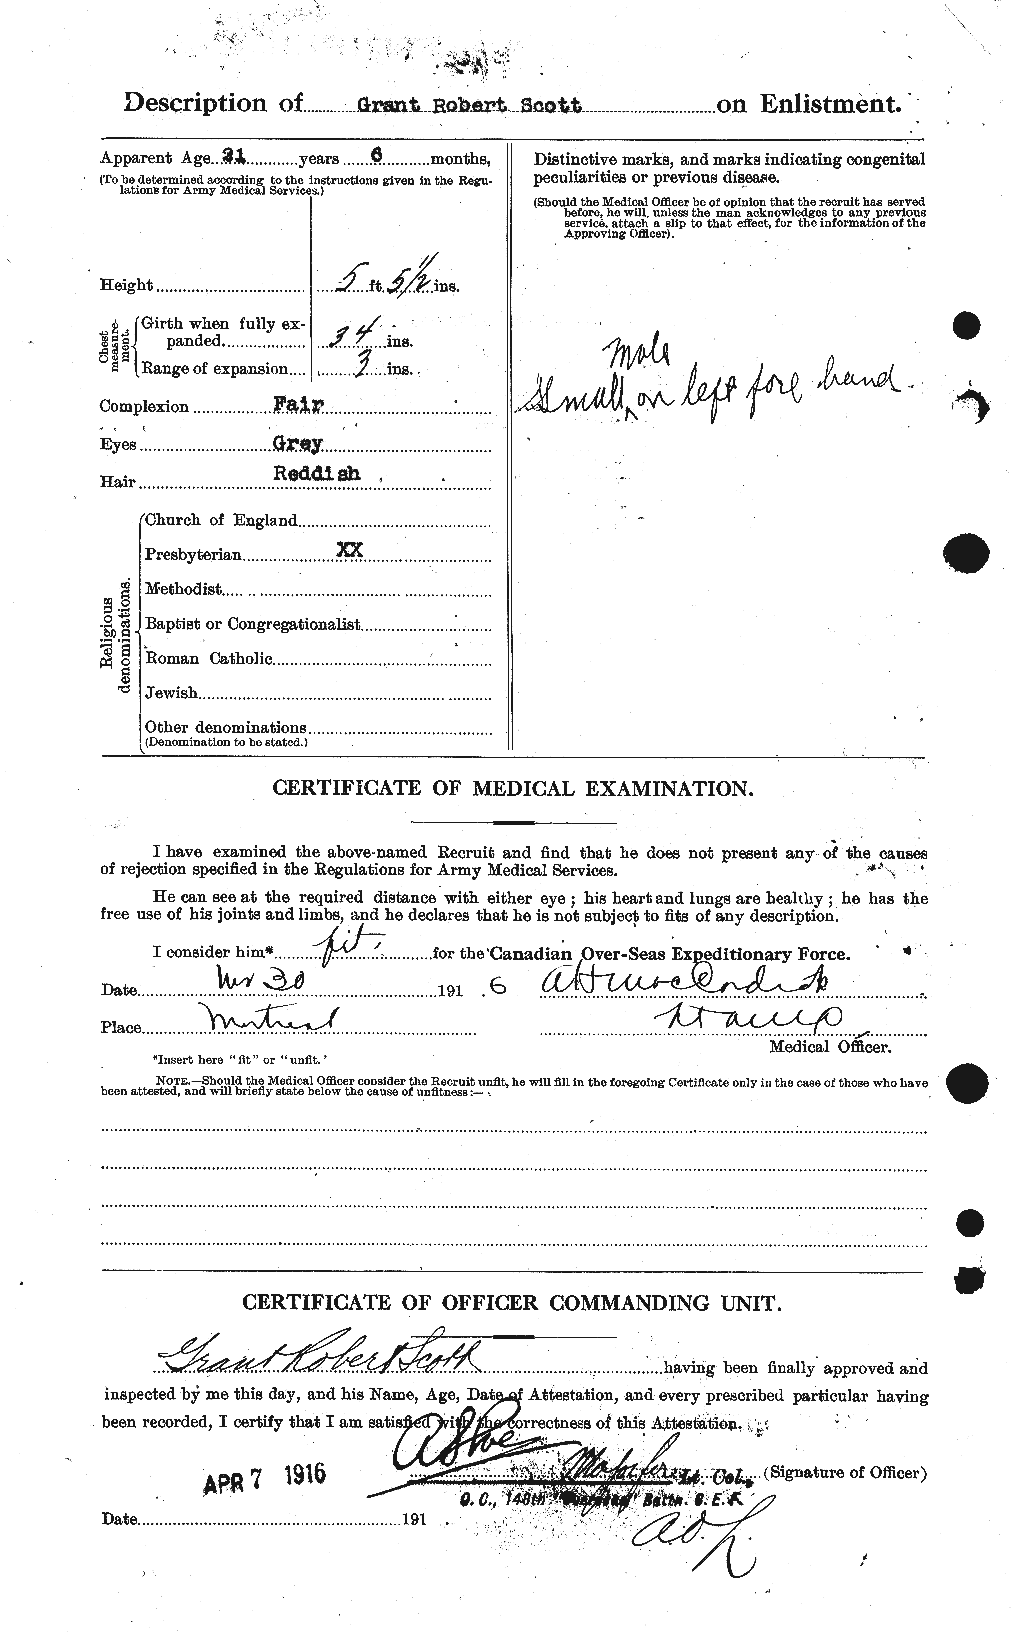 Personnel Records of the First World War - CEF 086510b